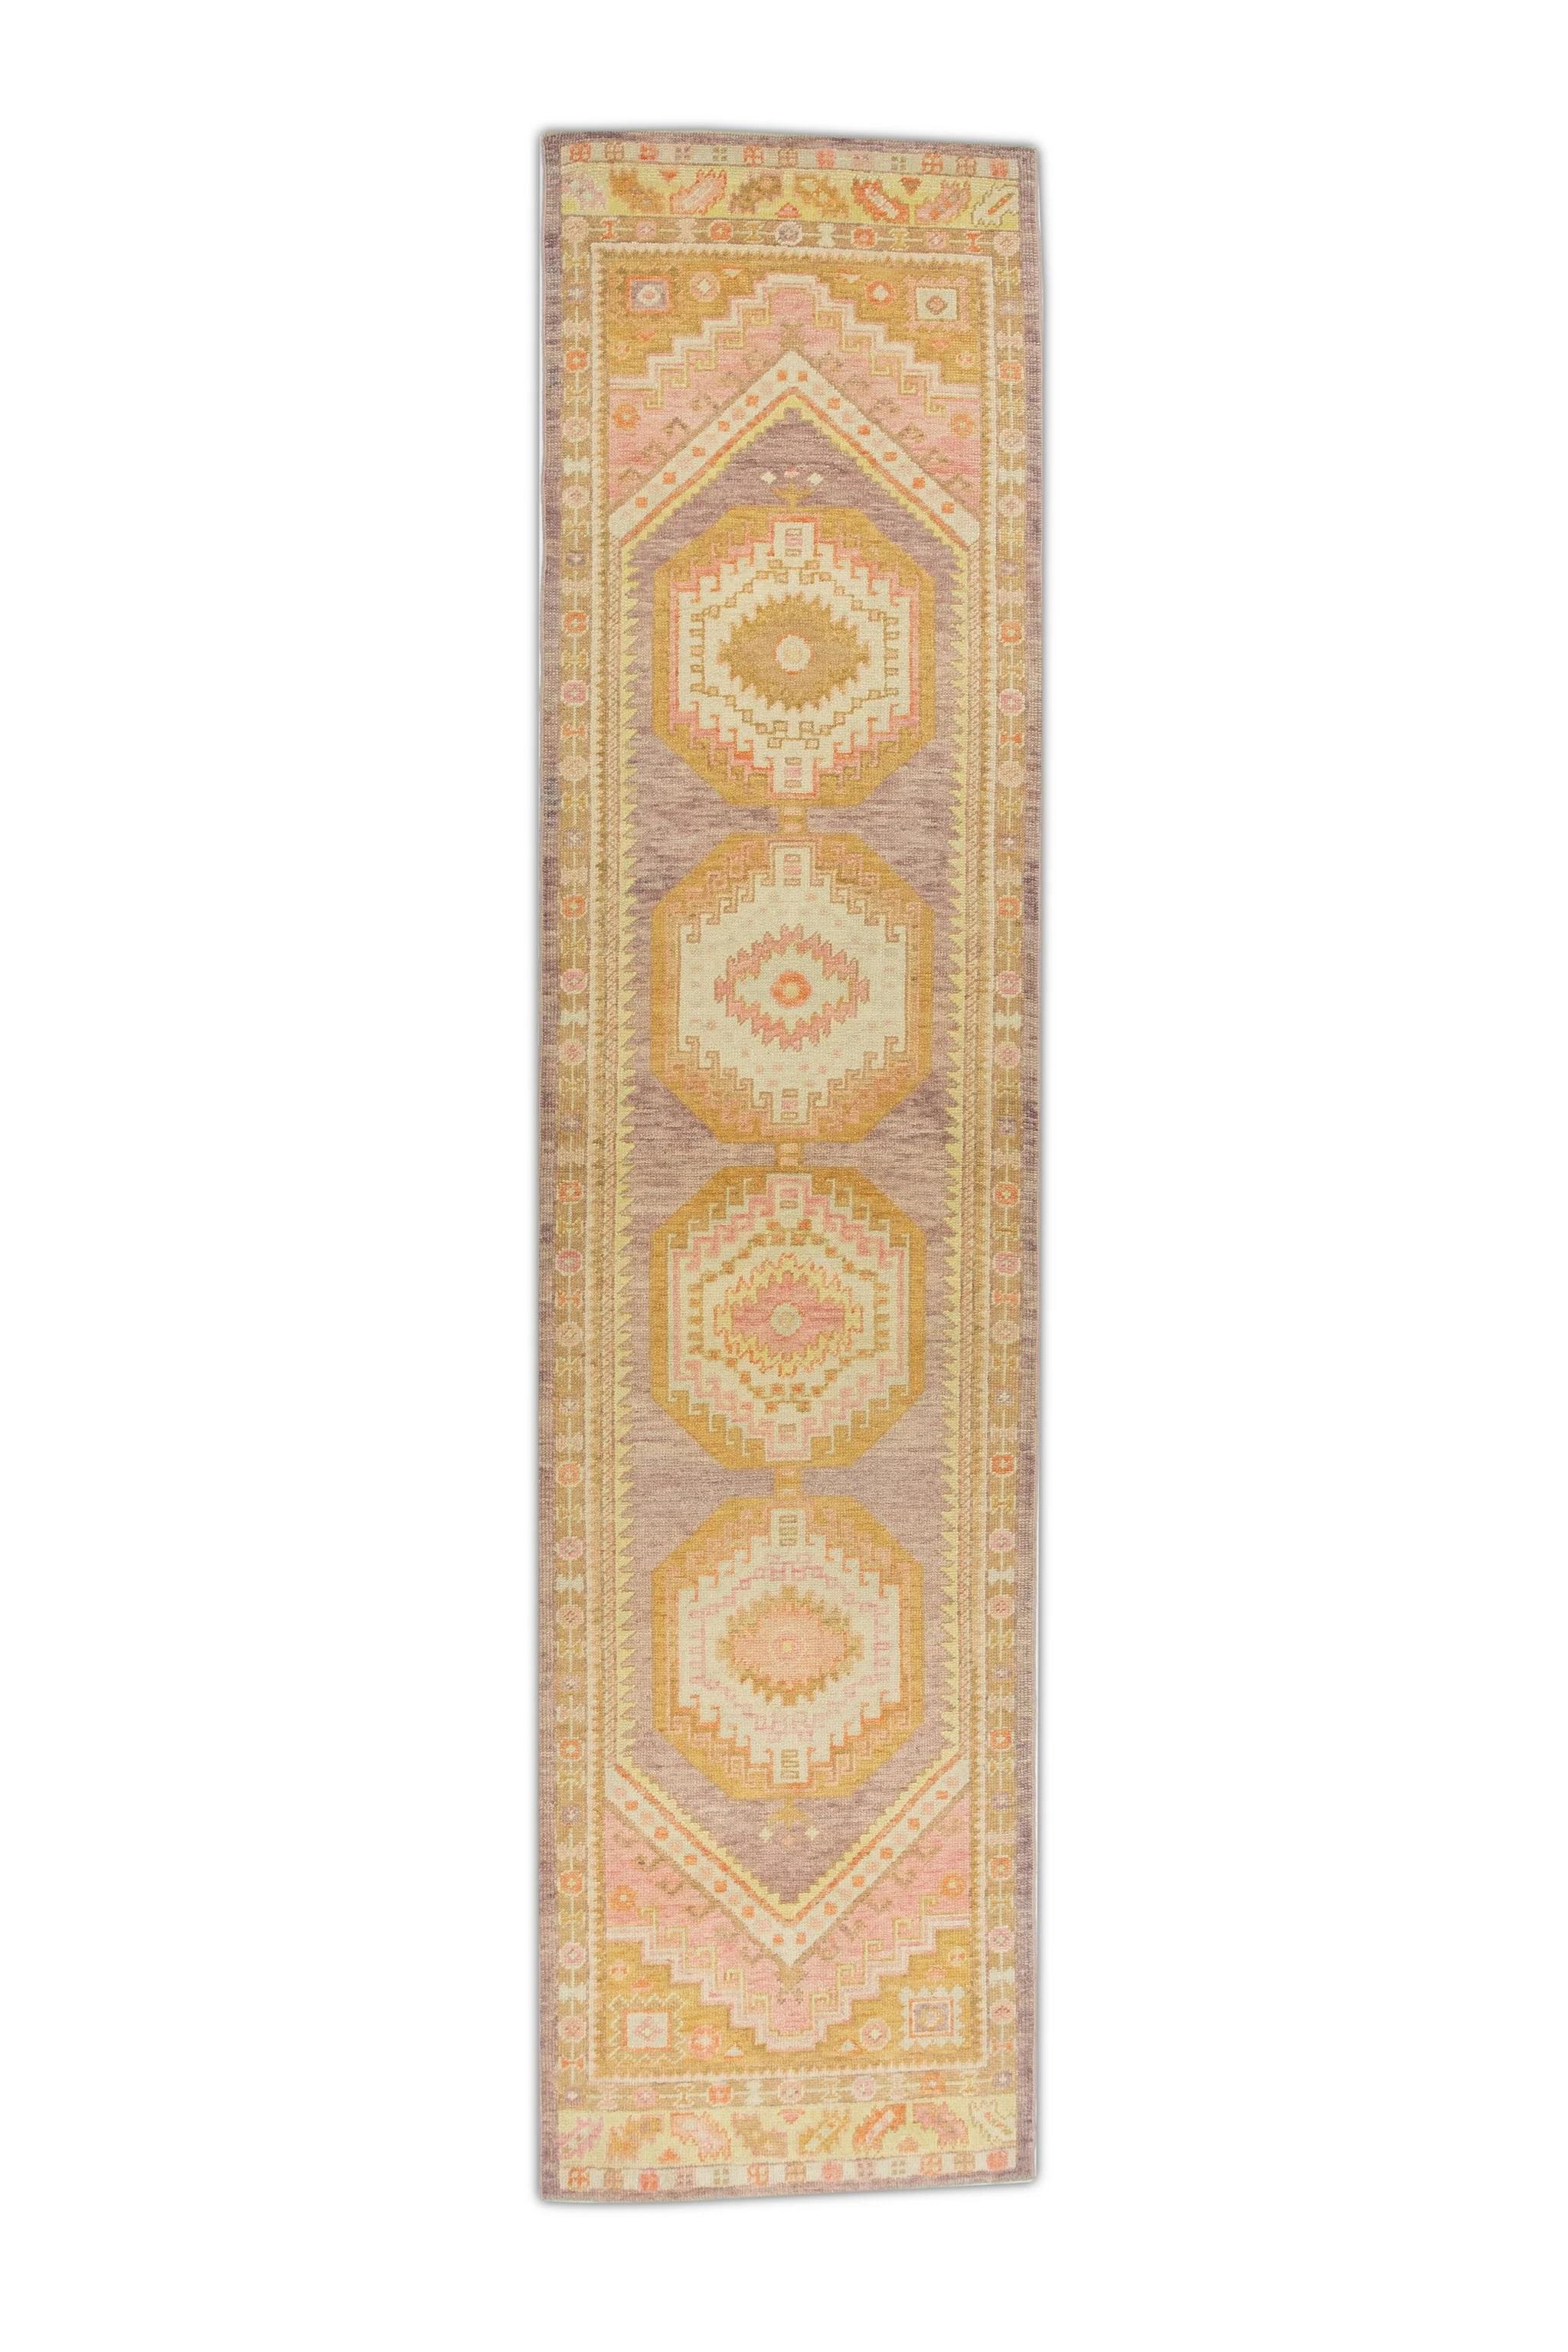 Contemporary Multicolor Handwoven Wool Turkish Oushak Runner 3' x 12'3